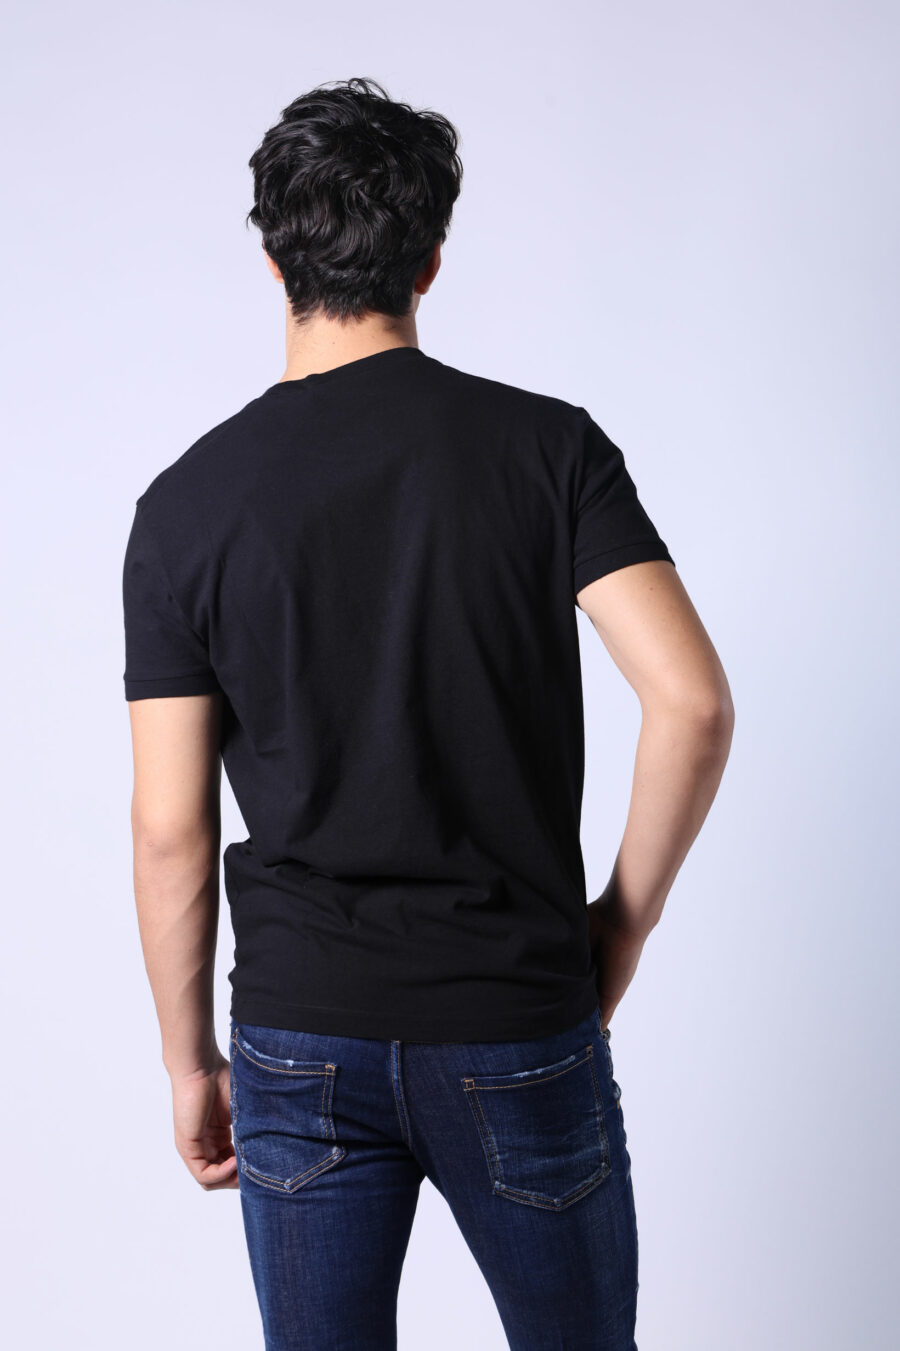 Black T-shirt with minilogue "dsquared2 milano" - Untitled Catalog 05474